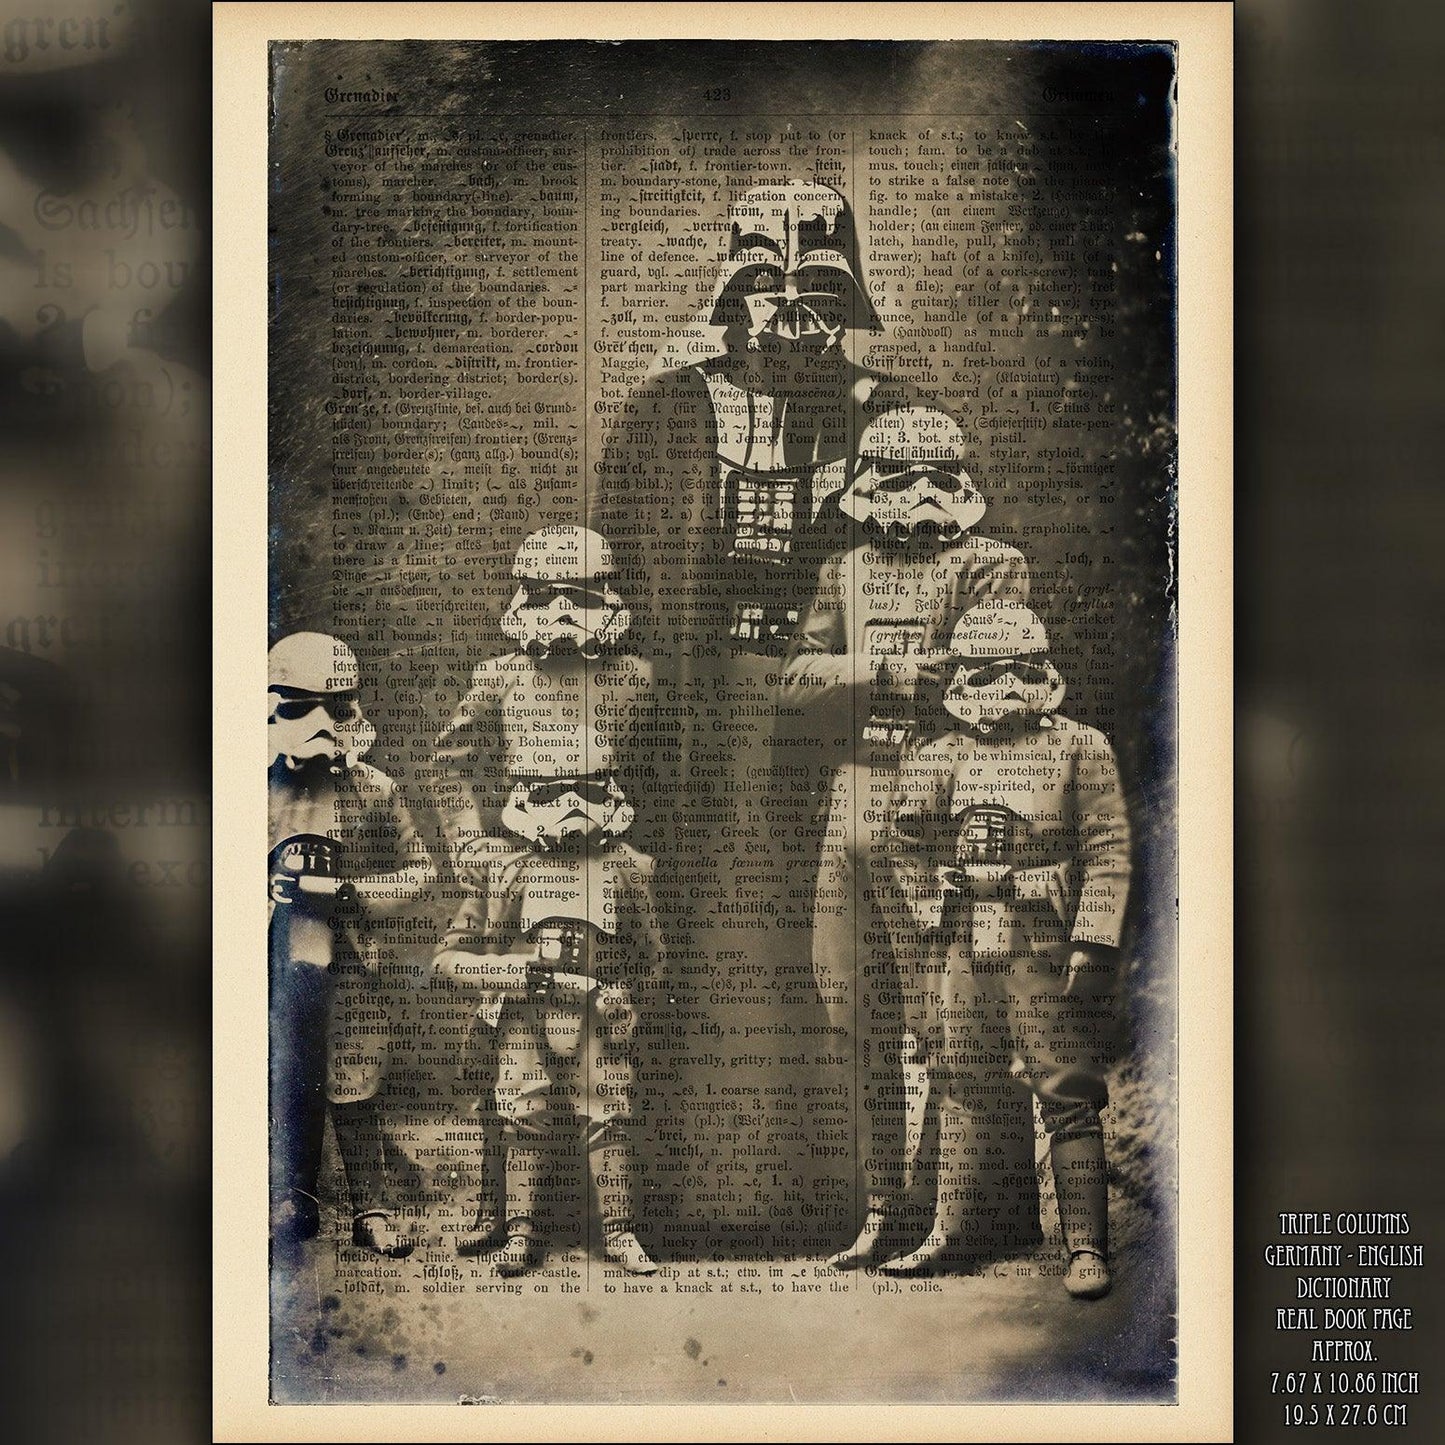 Vader Scout Camp - Victorian Gothic Art on Vintage Dictionary Page - ArtCursor